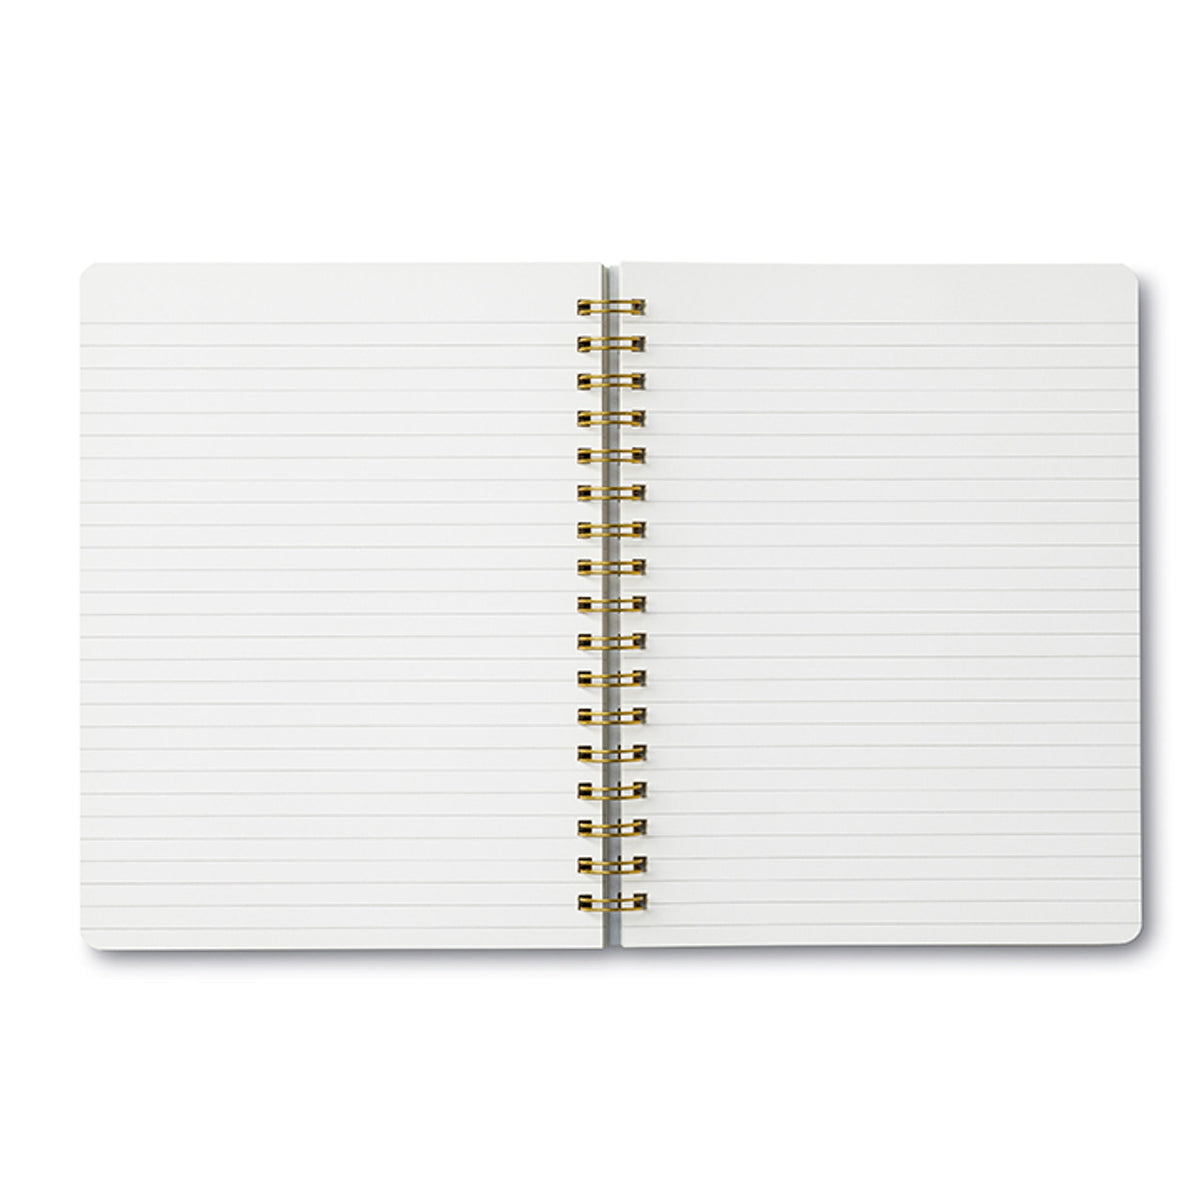 Spiral notebook with lined pages